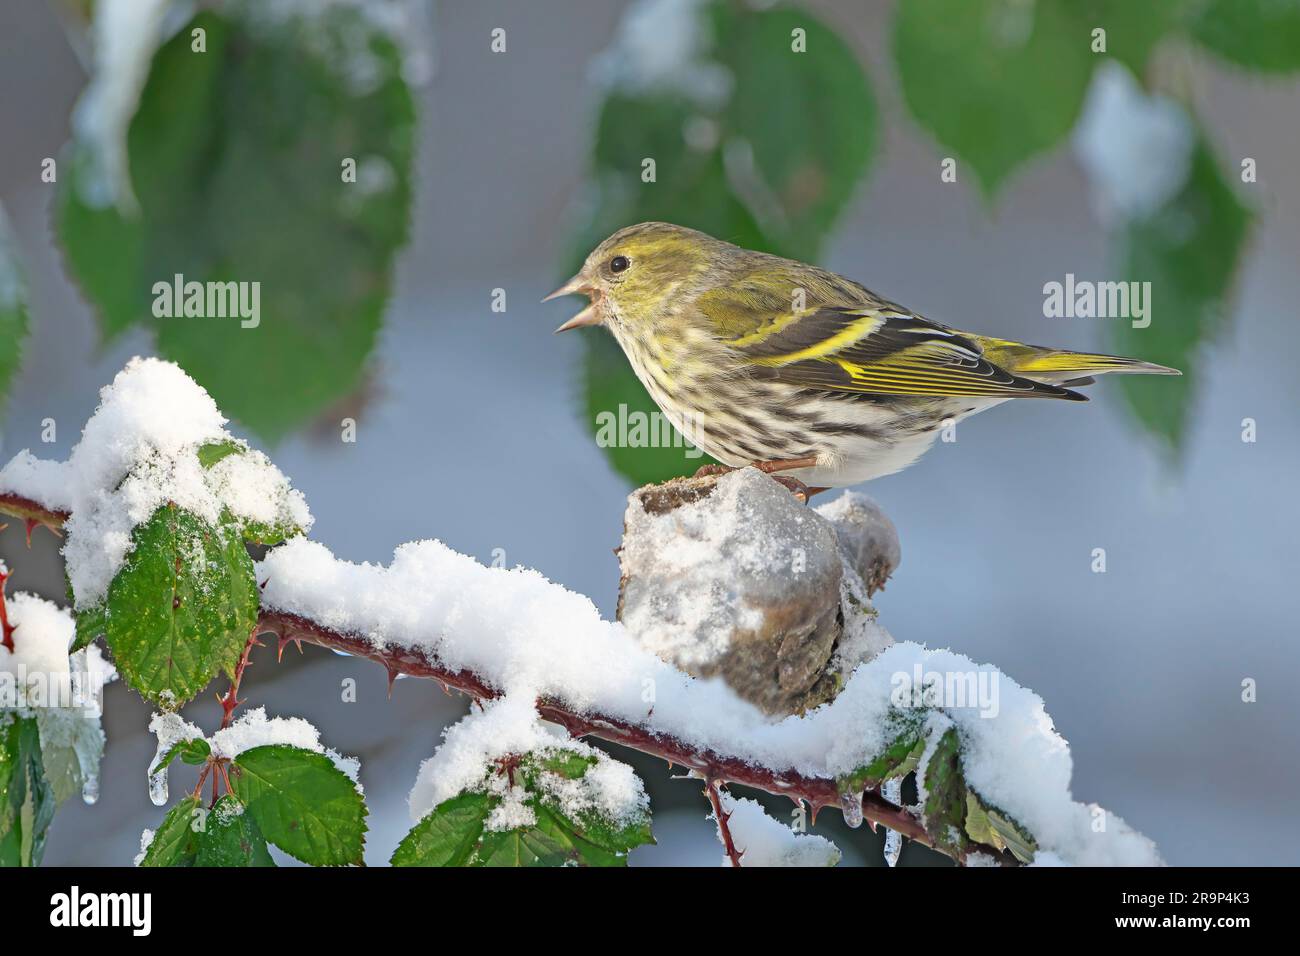 Eurasian Siskin (Carduelis spinus). Adult female perched on a snowy Bramble twig. Germany Stock Photo